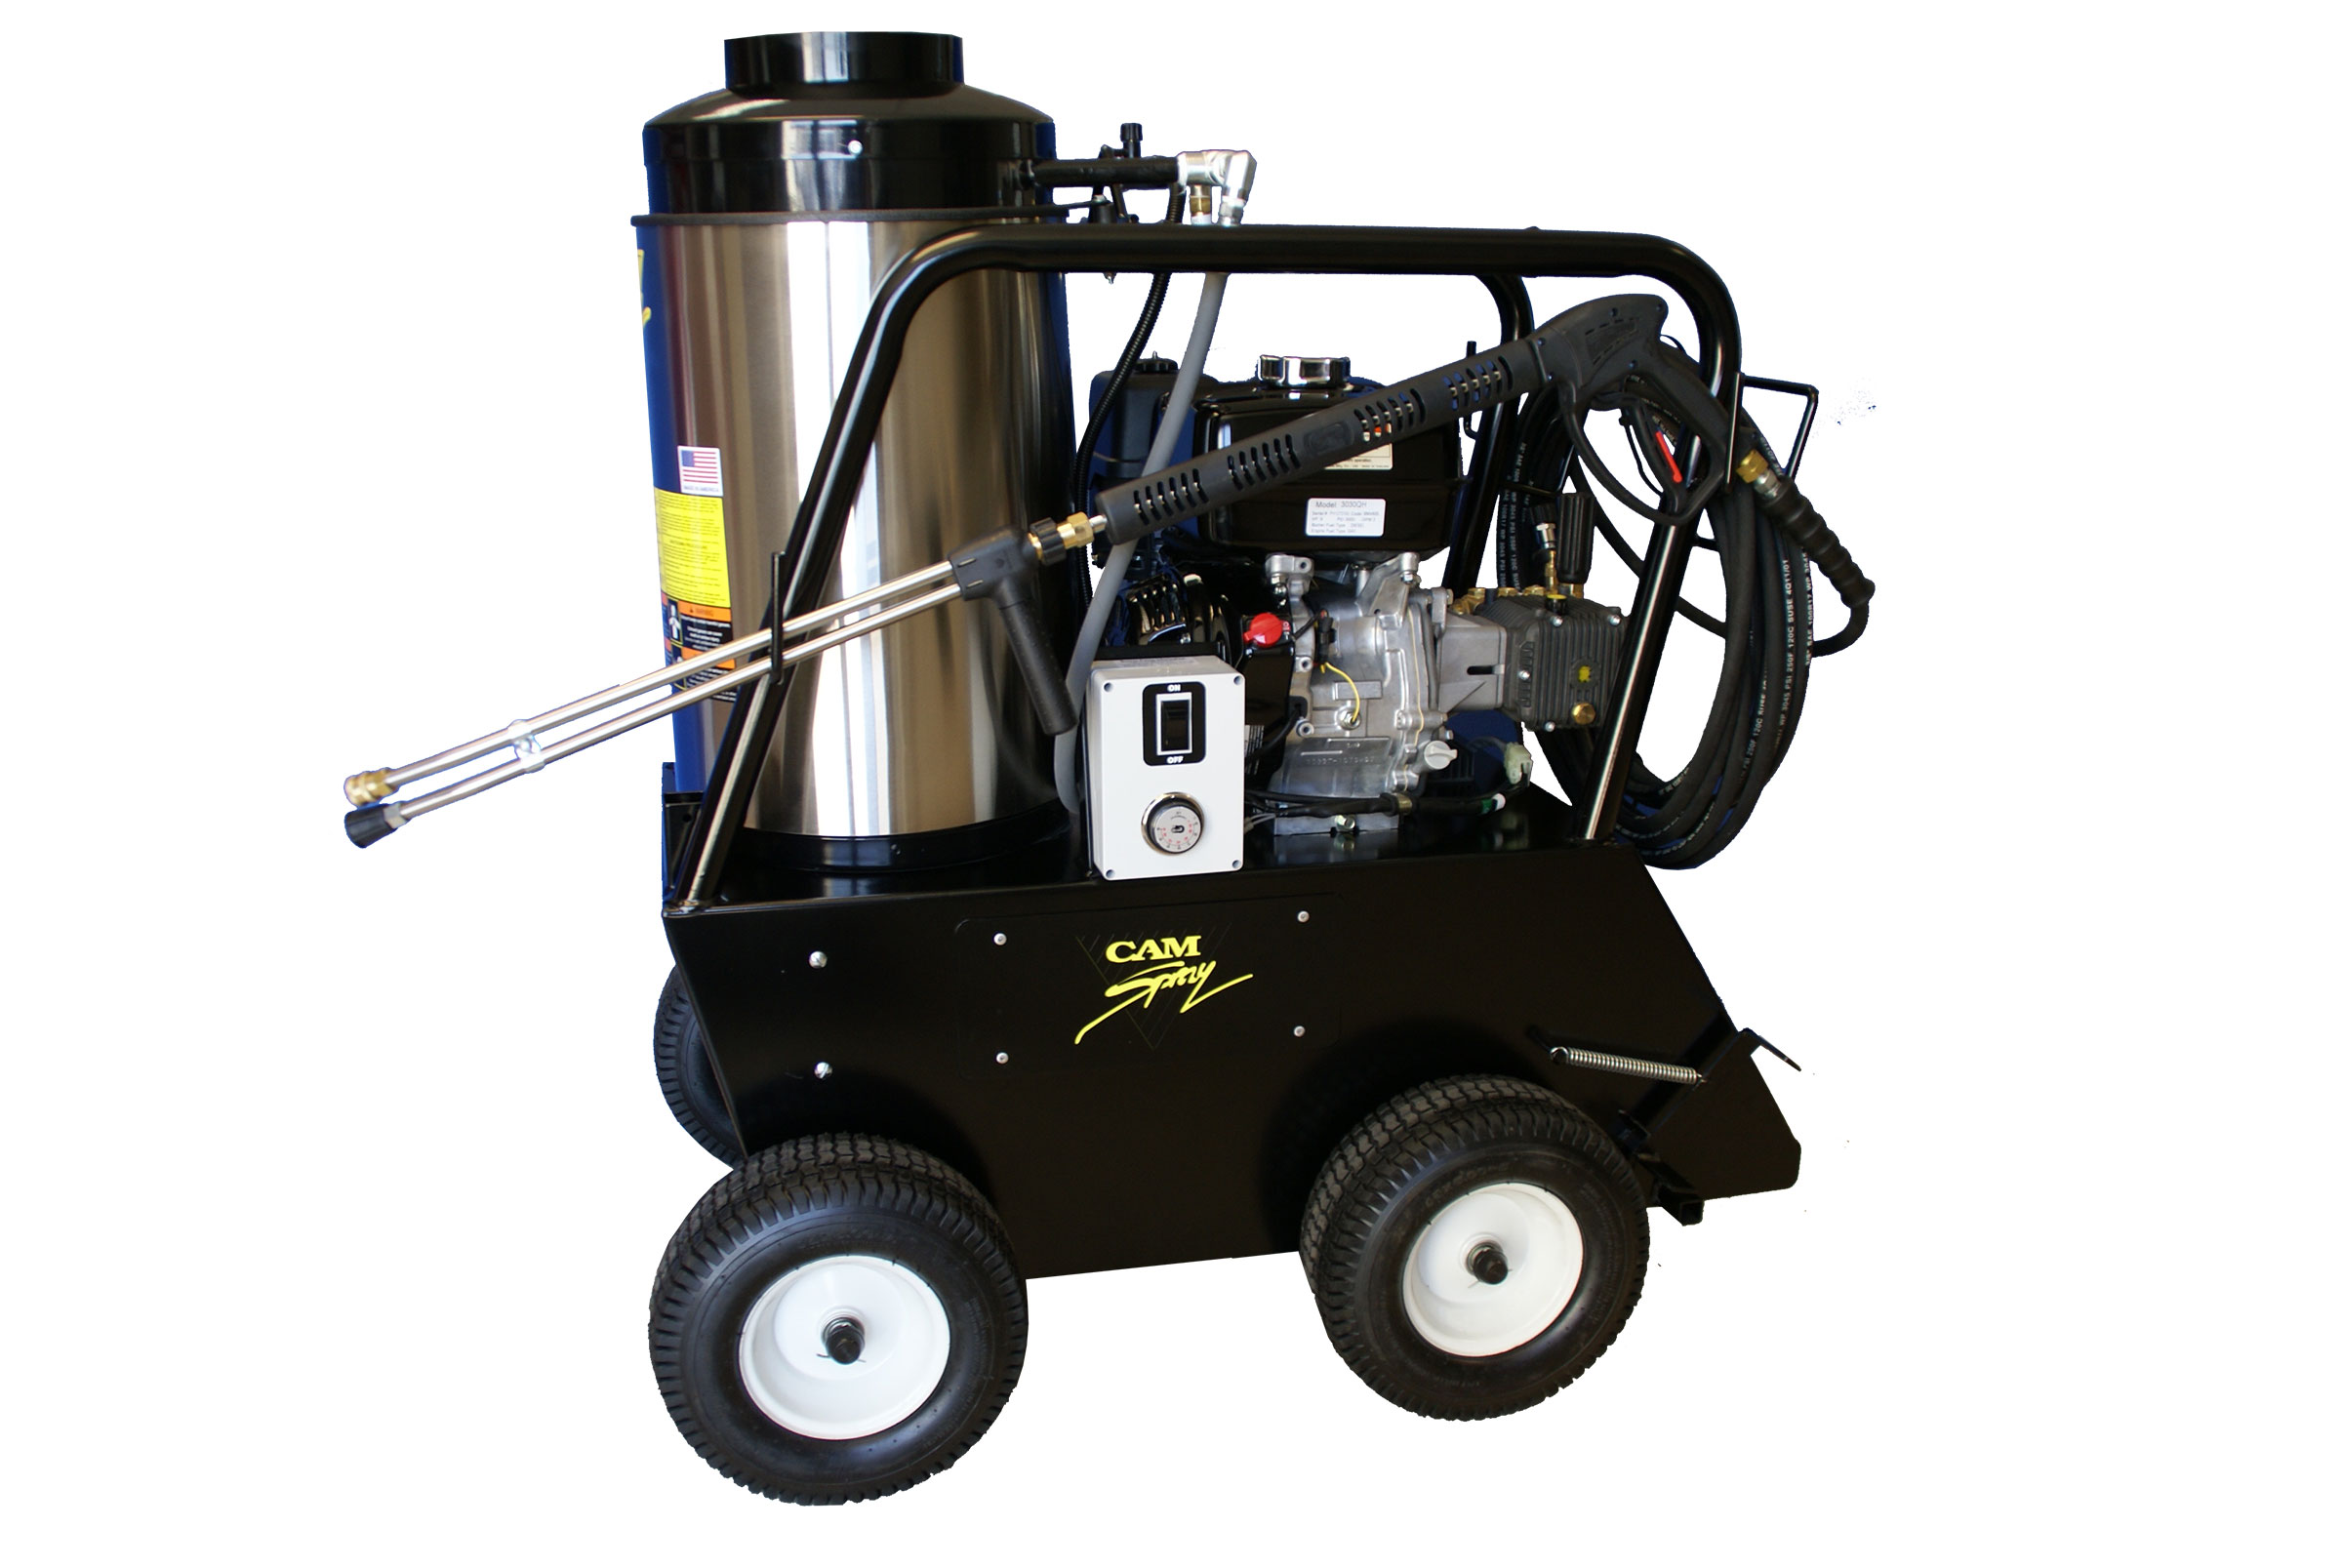 Best Electric Pressure Washer for Car Cleaning - 2022